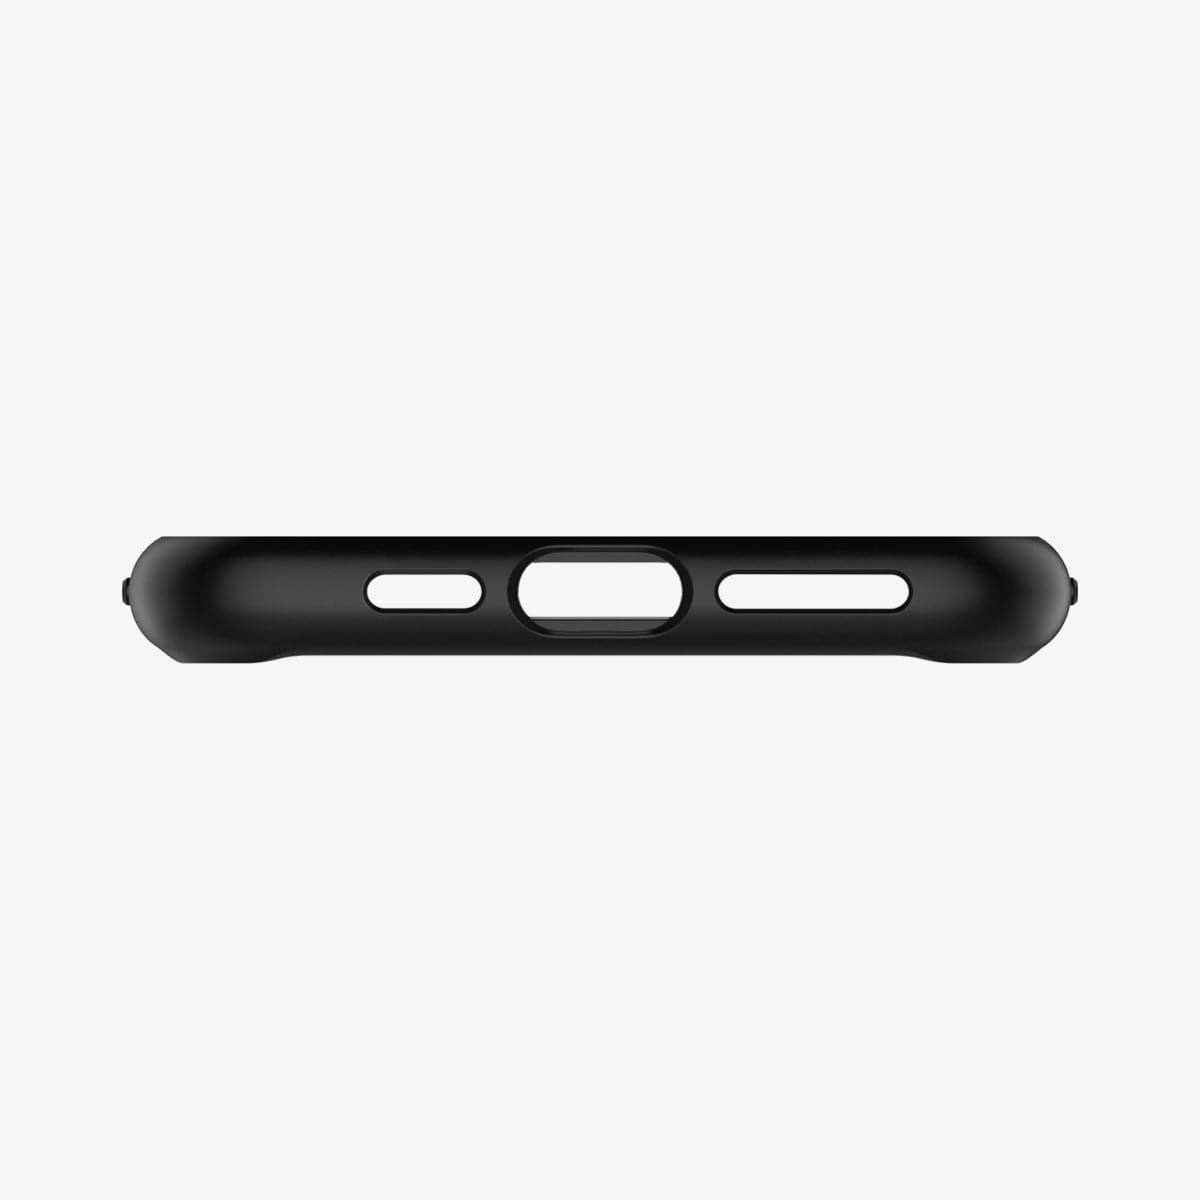 065CS25132 - iPhone XS Max Case Ultra Hybrid 360 in black showing the bottom with precise cutouts